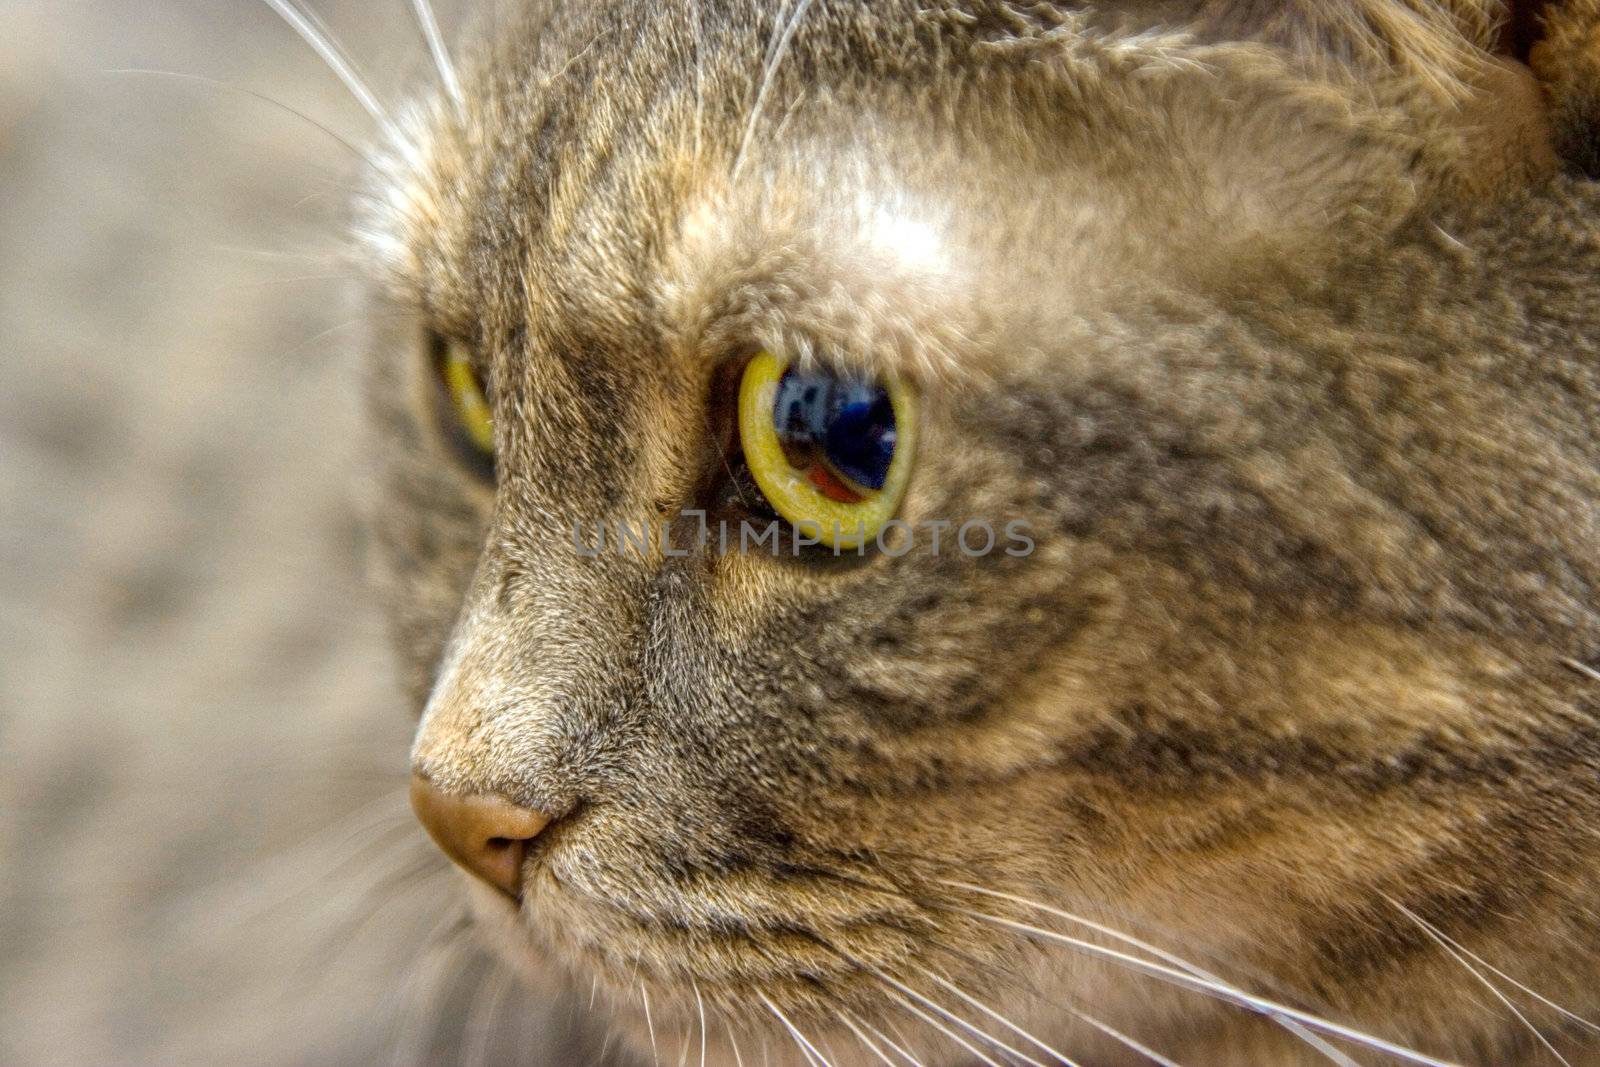 Close up of a cat's green eye